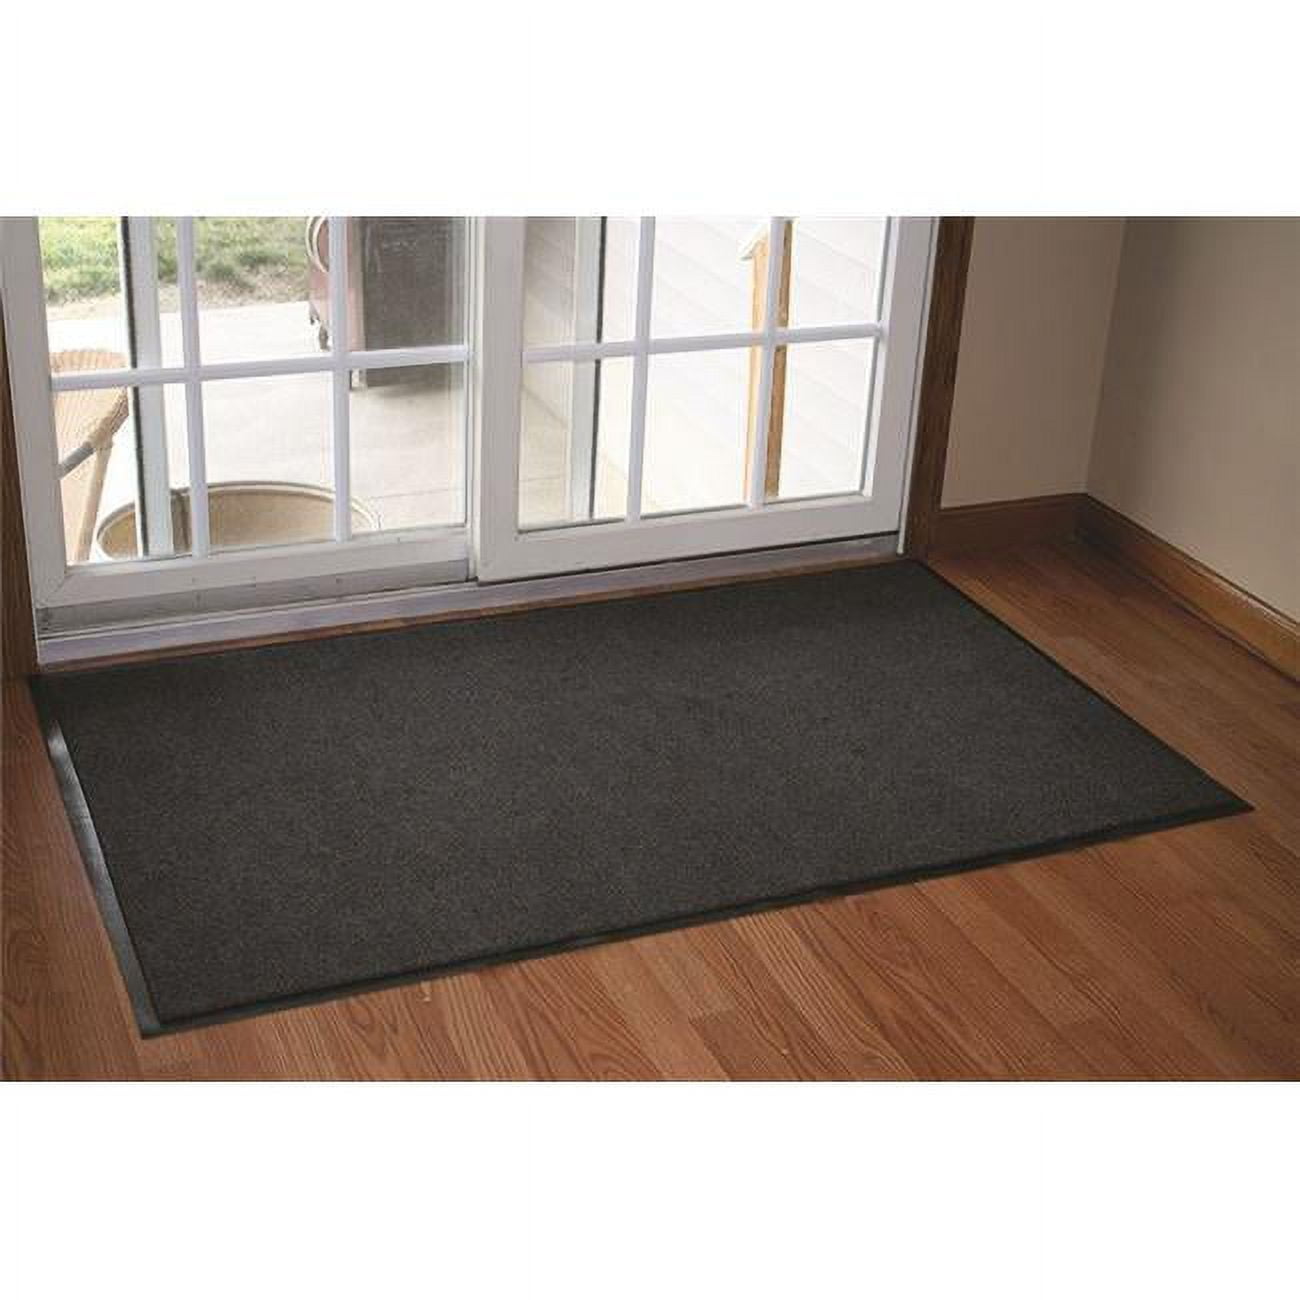 Durable 654s36ch Wipe-n-walk Entrance Mat, 3 X 6 In. - Charcoal